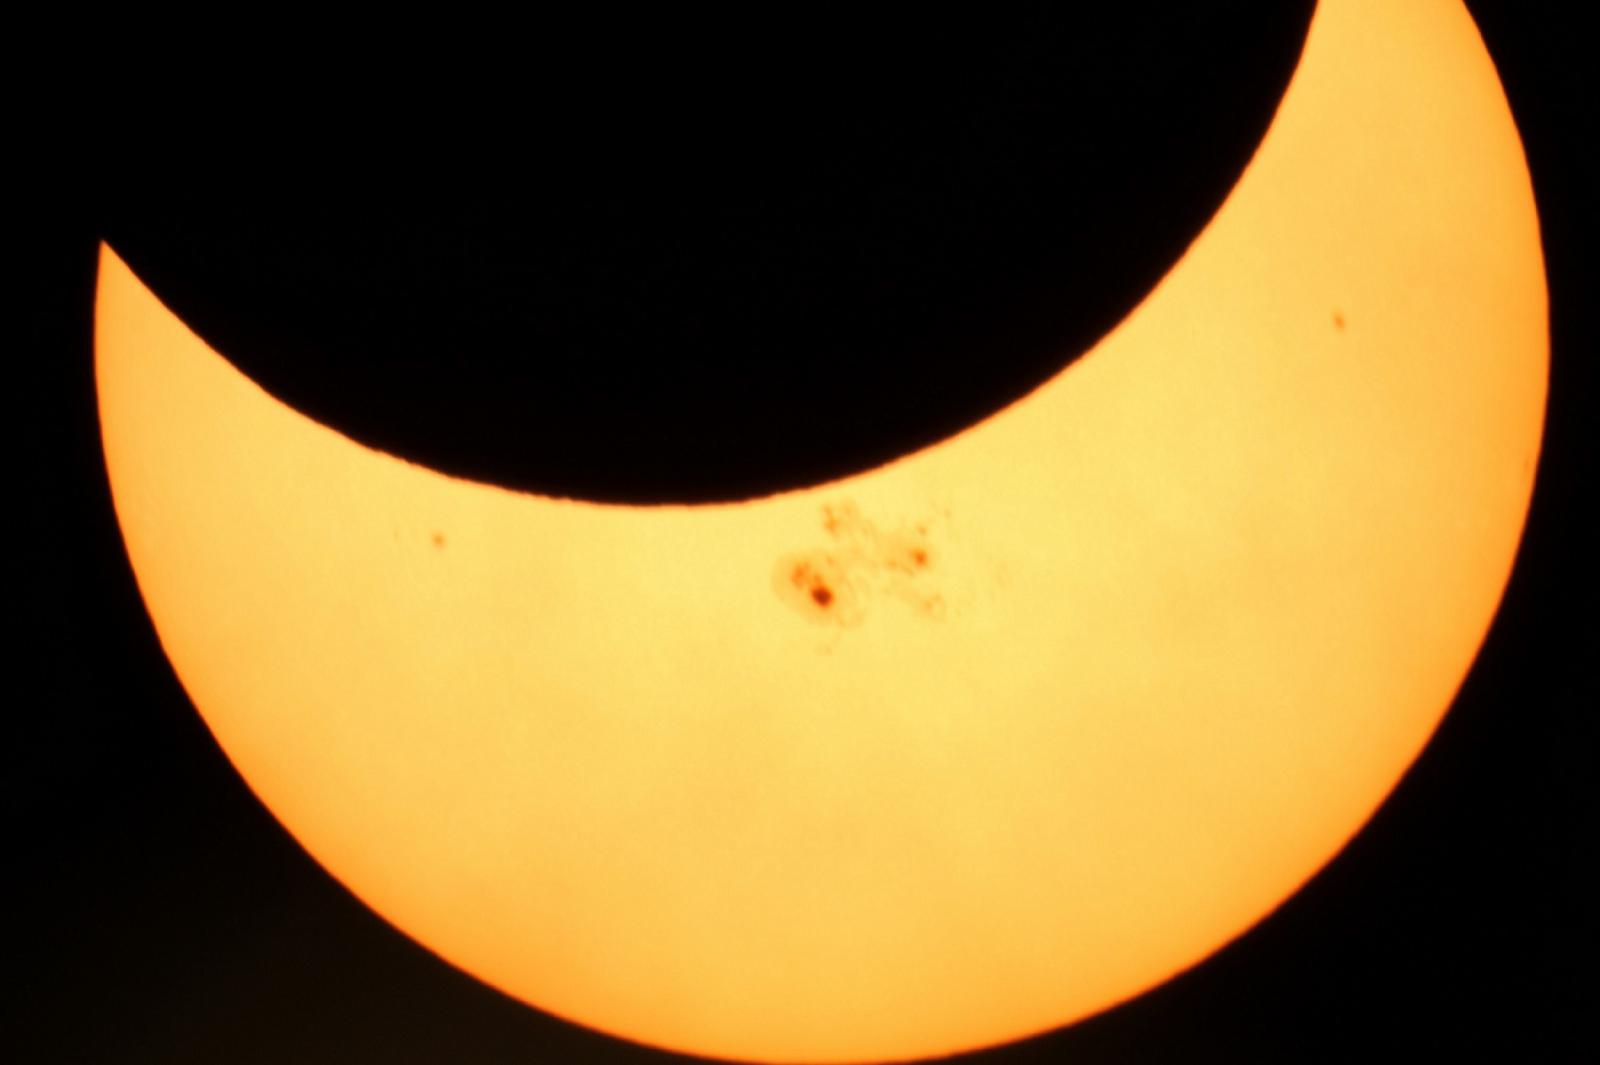 Partial Solar Eclipse as seen from east of WA General